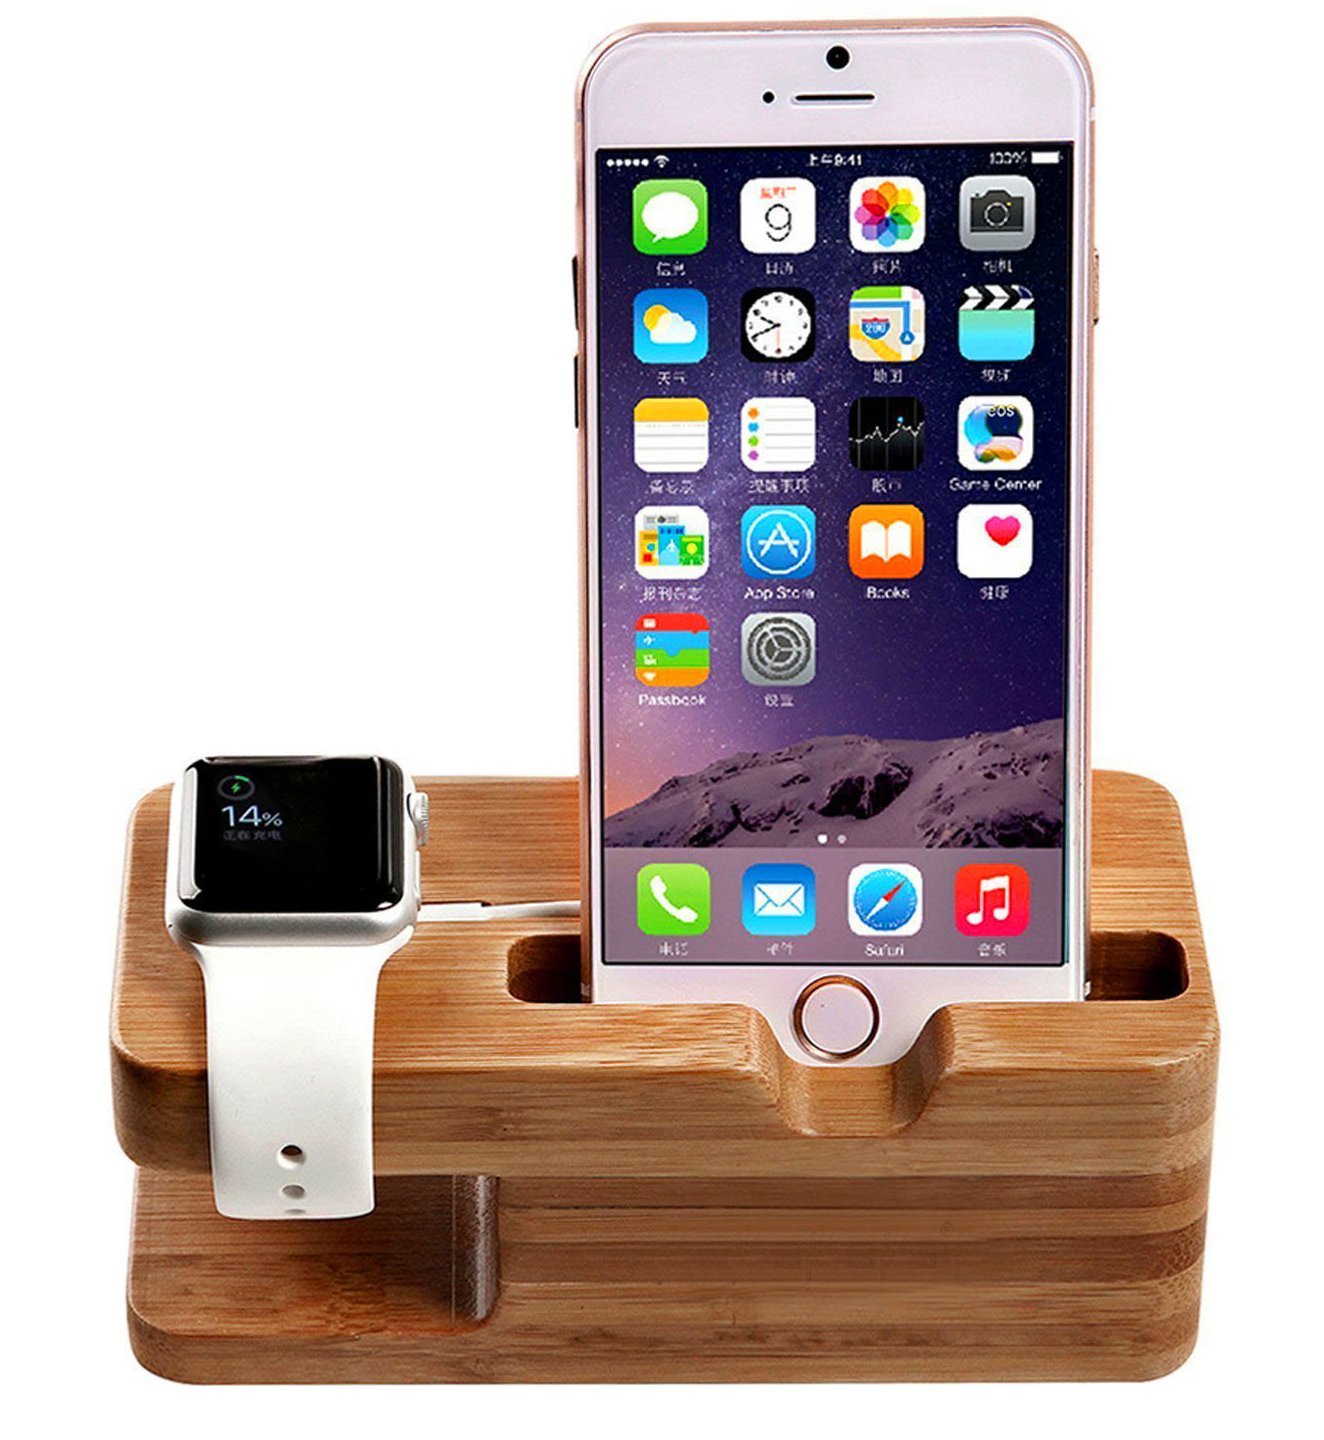 Watch Stand,AICase Bamboo Wood Charge Dock,Charge Dock Holder,Bamboo Wood Charge Station/Cradle for Apple Watch,iPhone,smartphone,iPhone iPad and Smartphones and Tablets (Bamboo Wood) - image 1 of 6